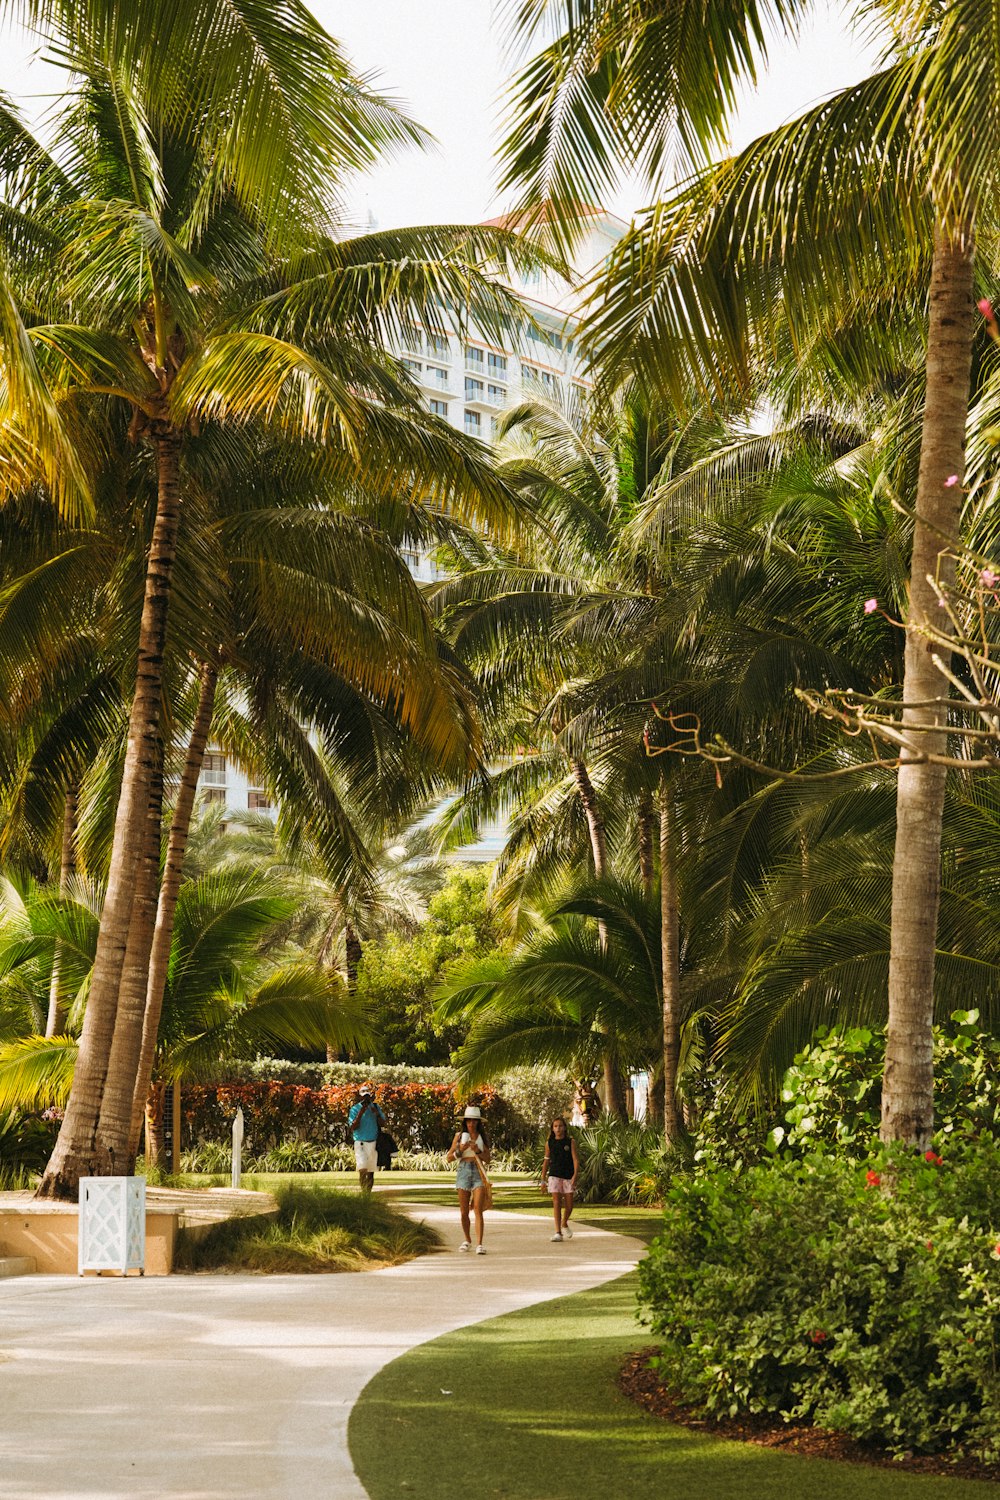 people walking on a path between palm trees